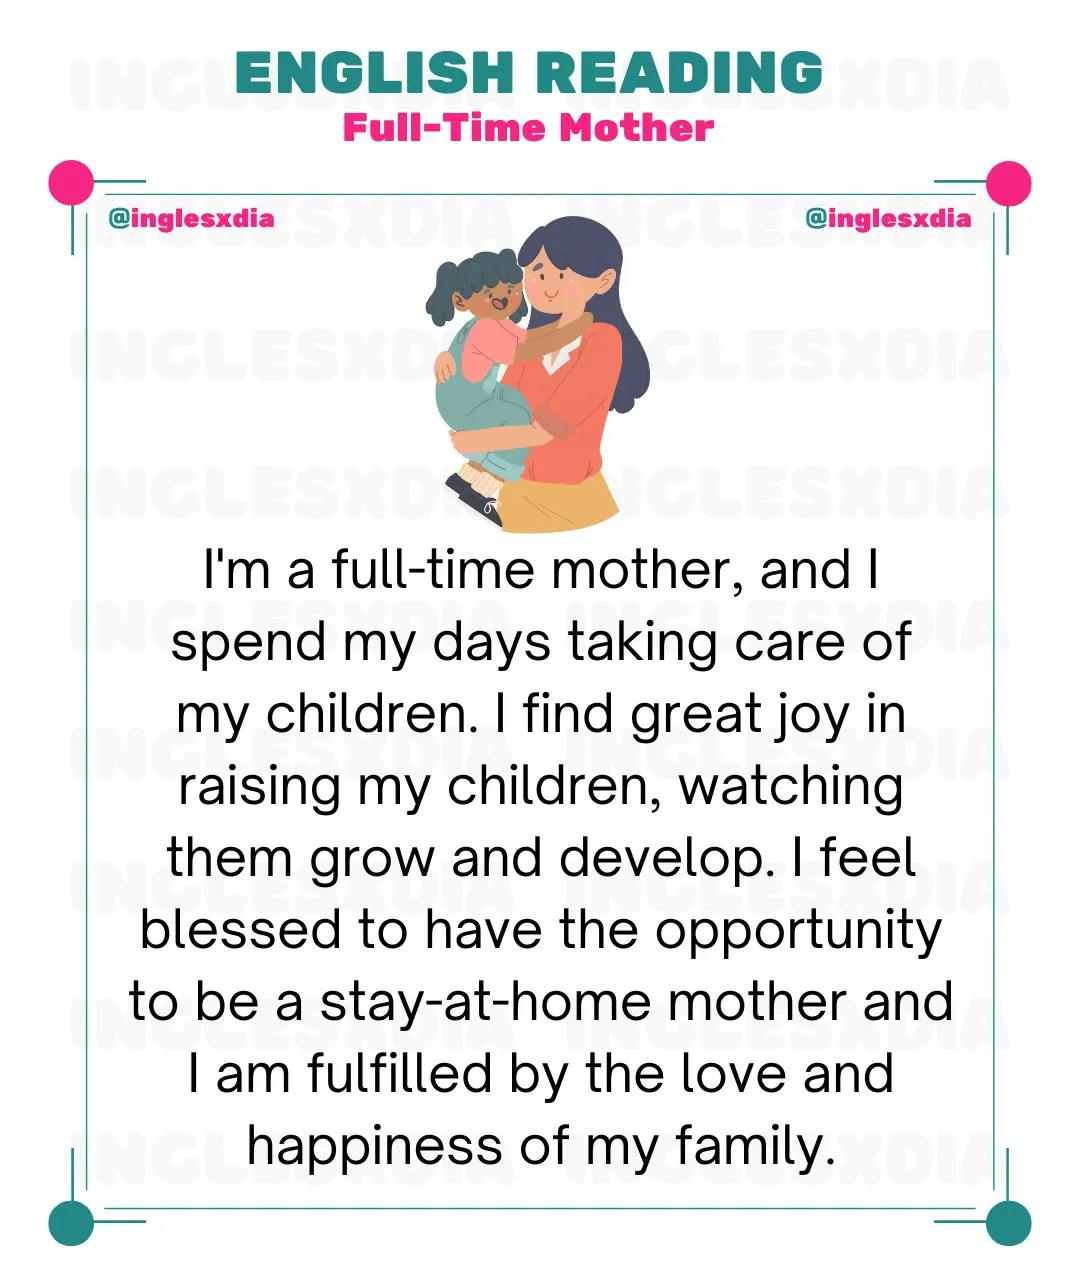 Full-Time Mother